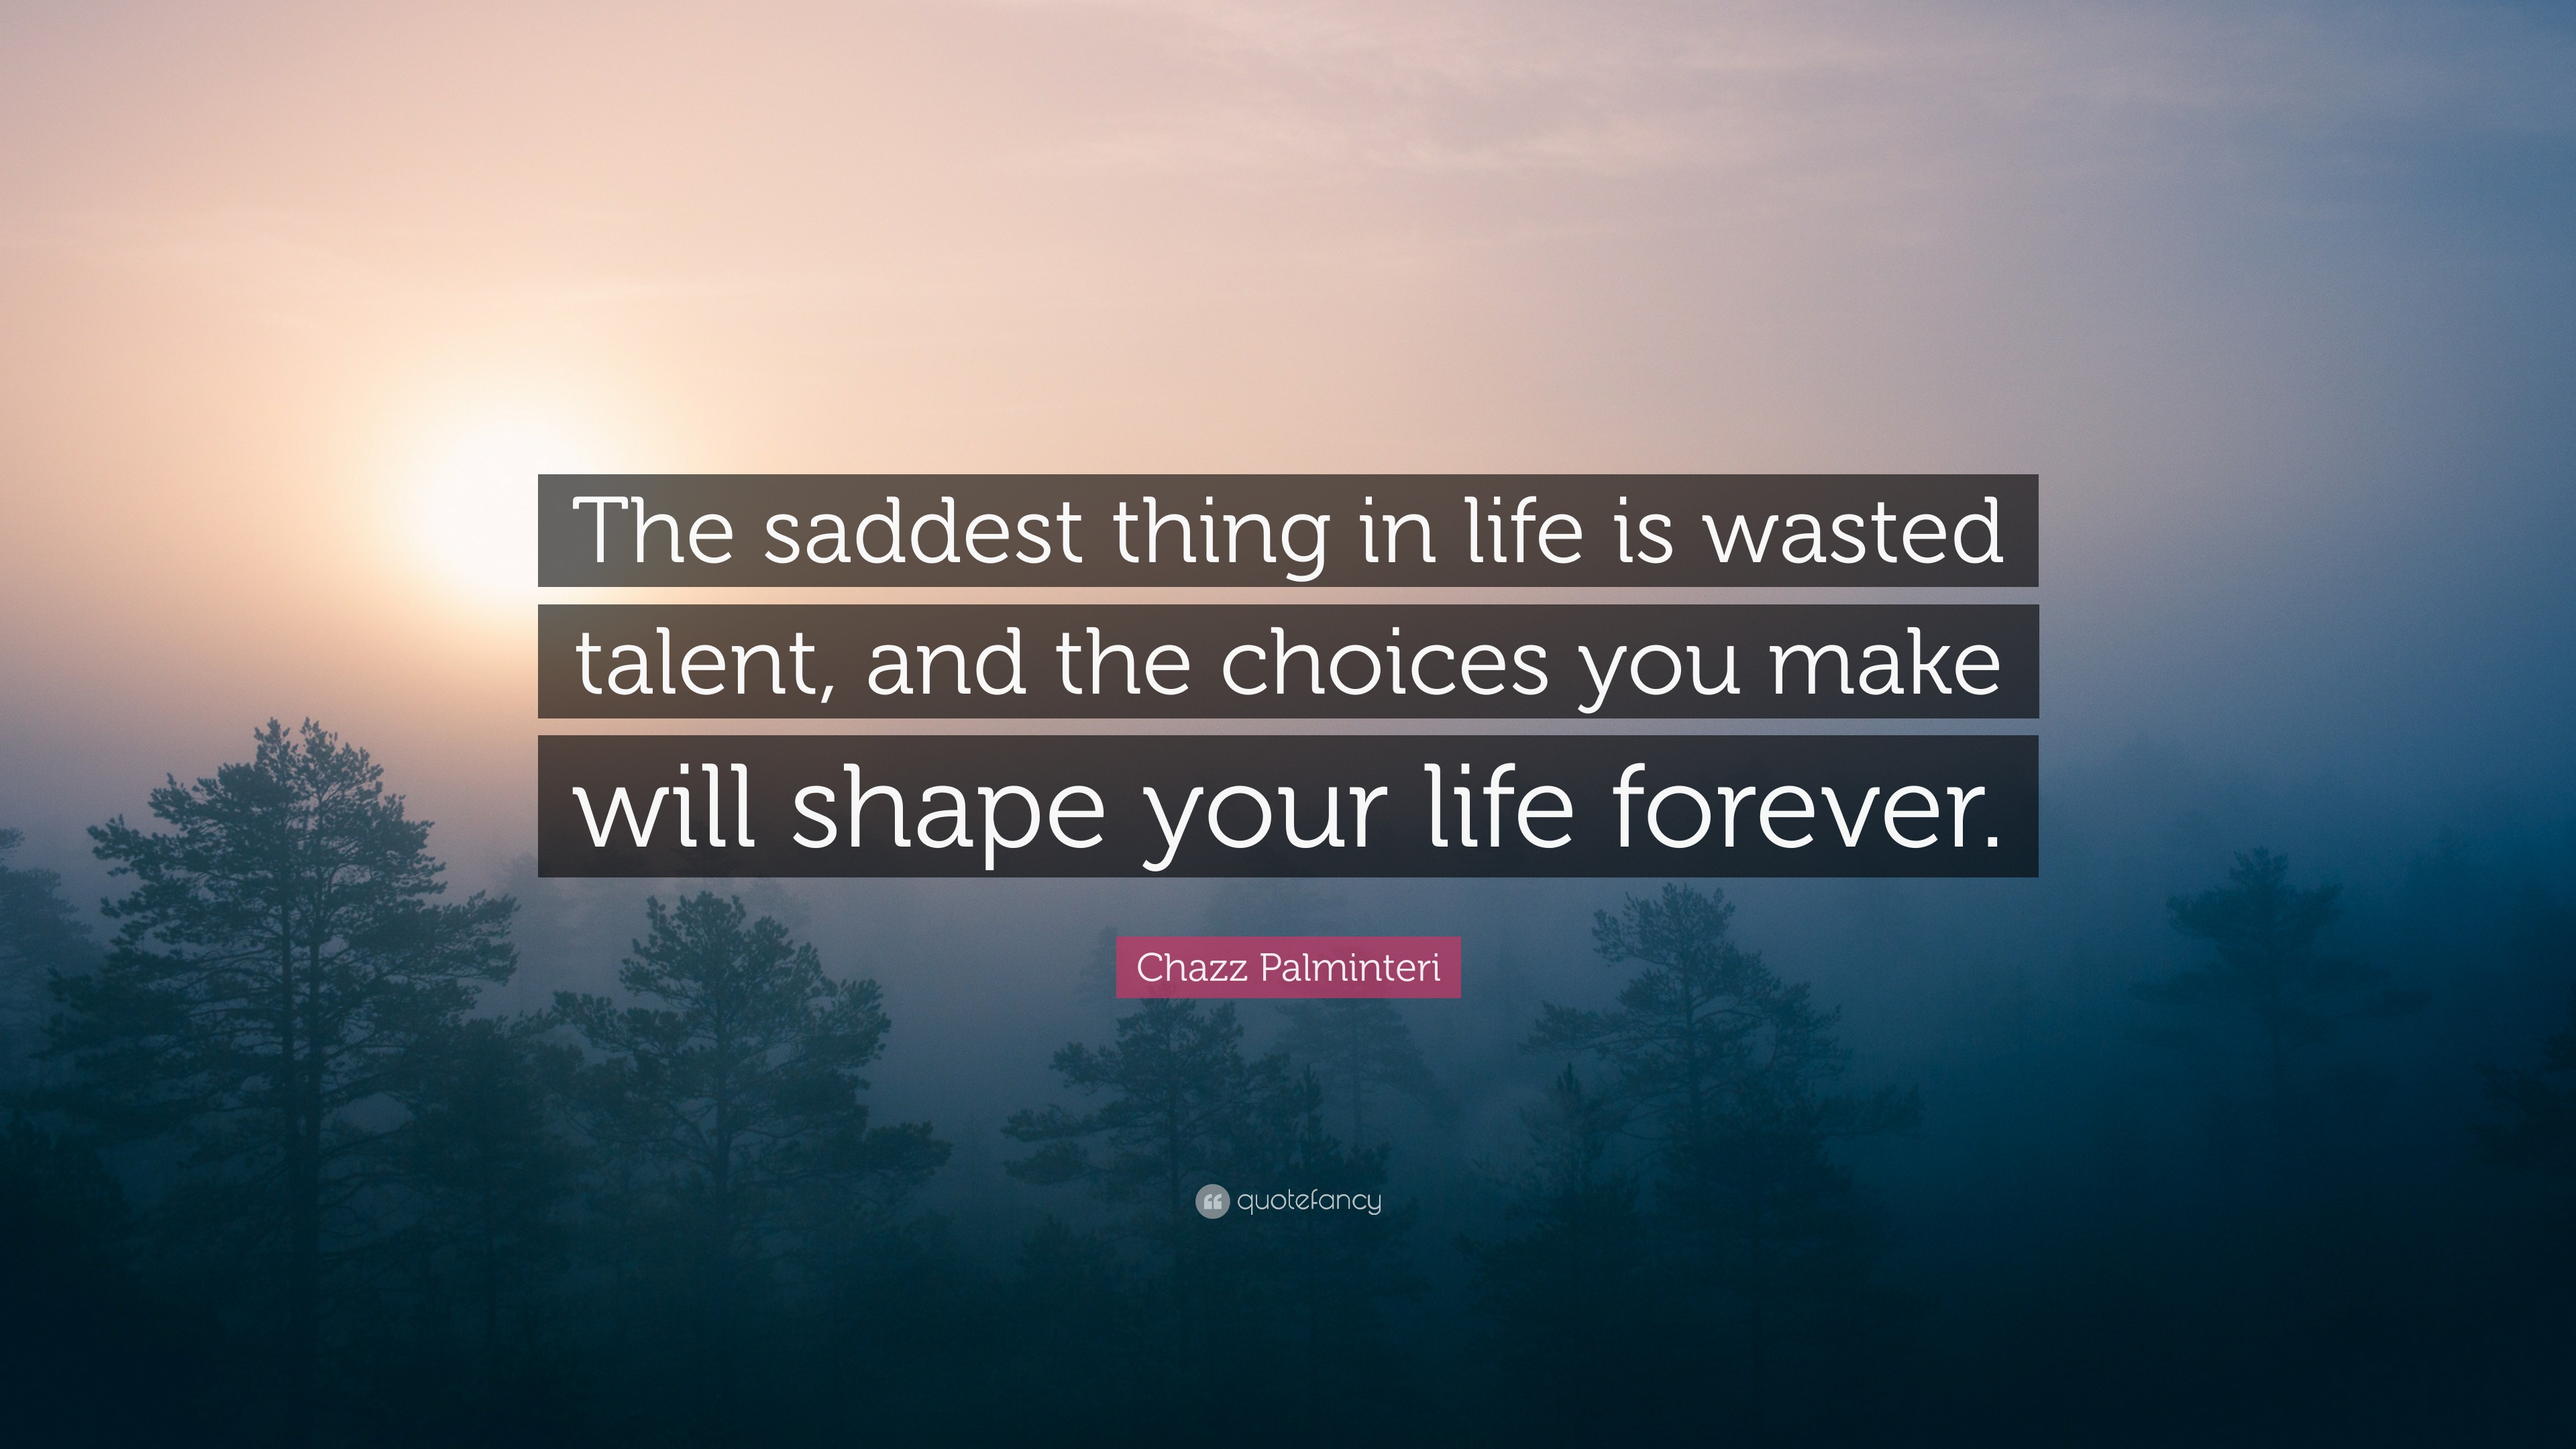 Chazz Palminteri Quote: "The saddest thing in life is wasted talent, and the choices you make ...